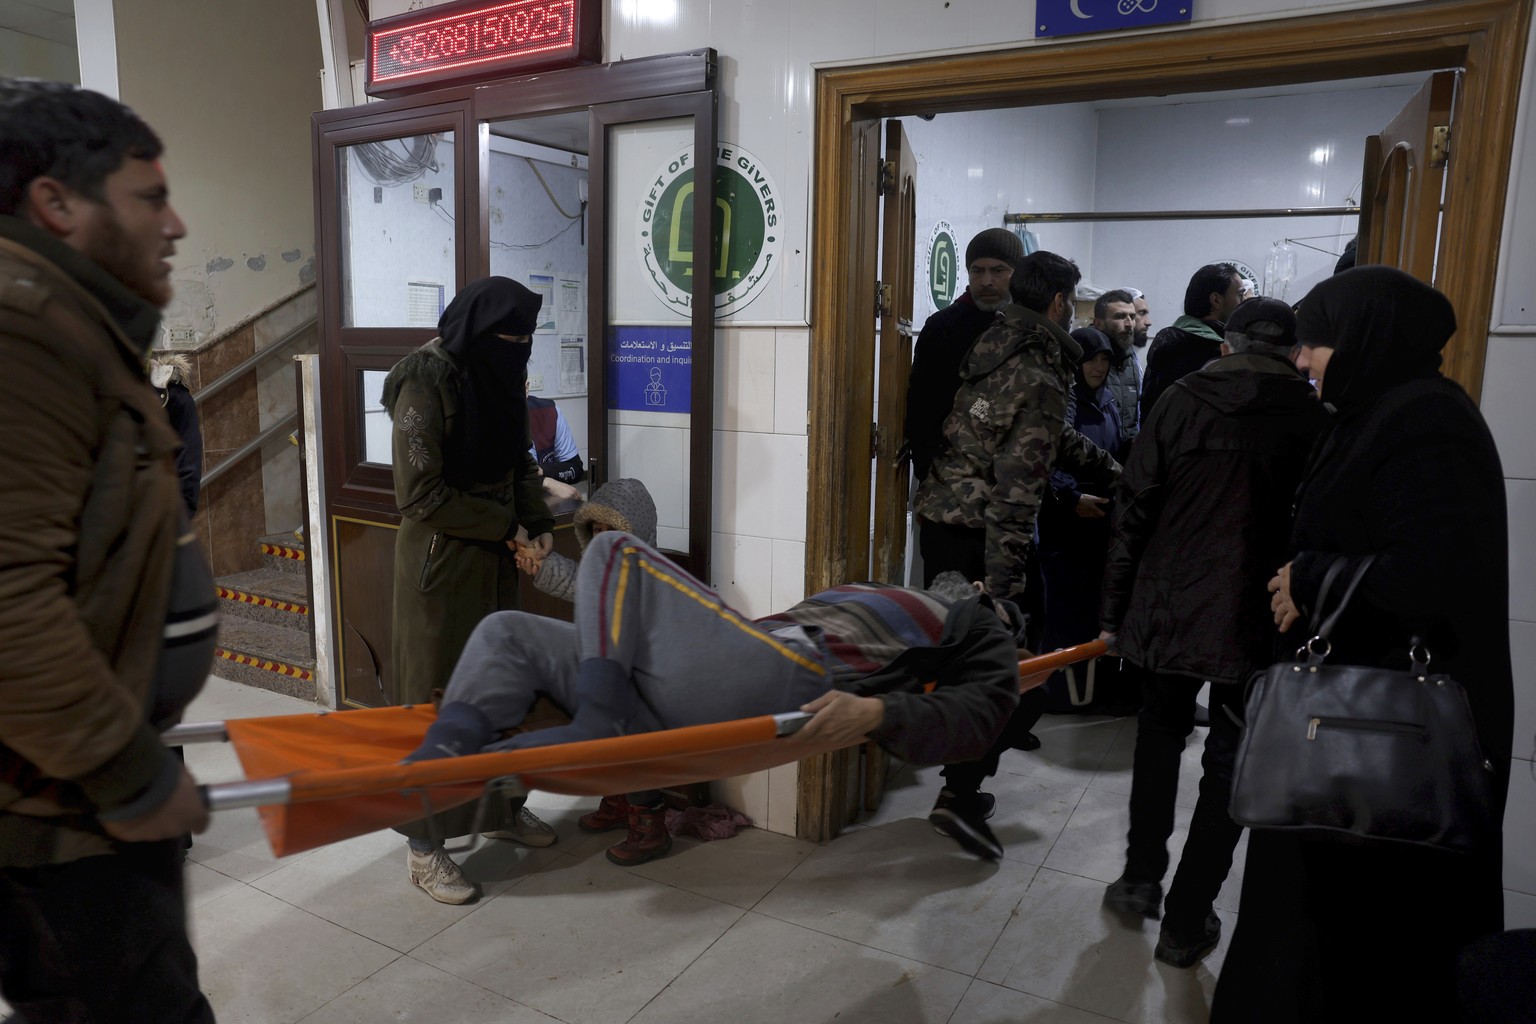 People carry a man injured in an earthquake into the al-Rahma Hospital in the town of Darkush, Idlib province, northern Syria, Monday, Feb. 6, 2023. A powerful earthquake has caused significant damage ...